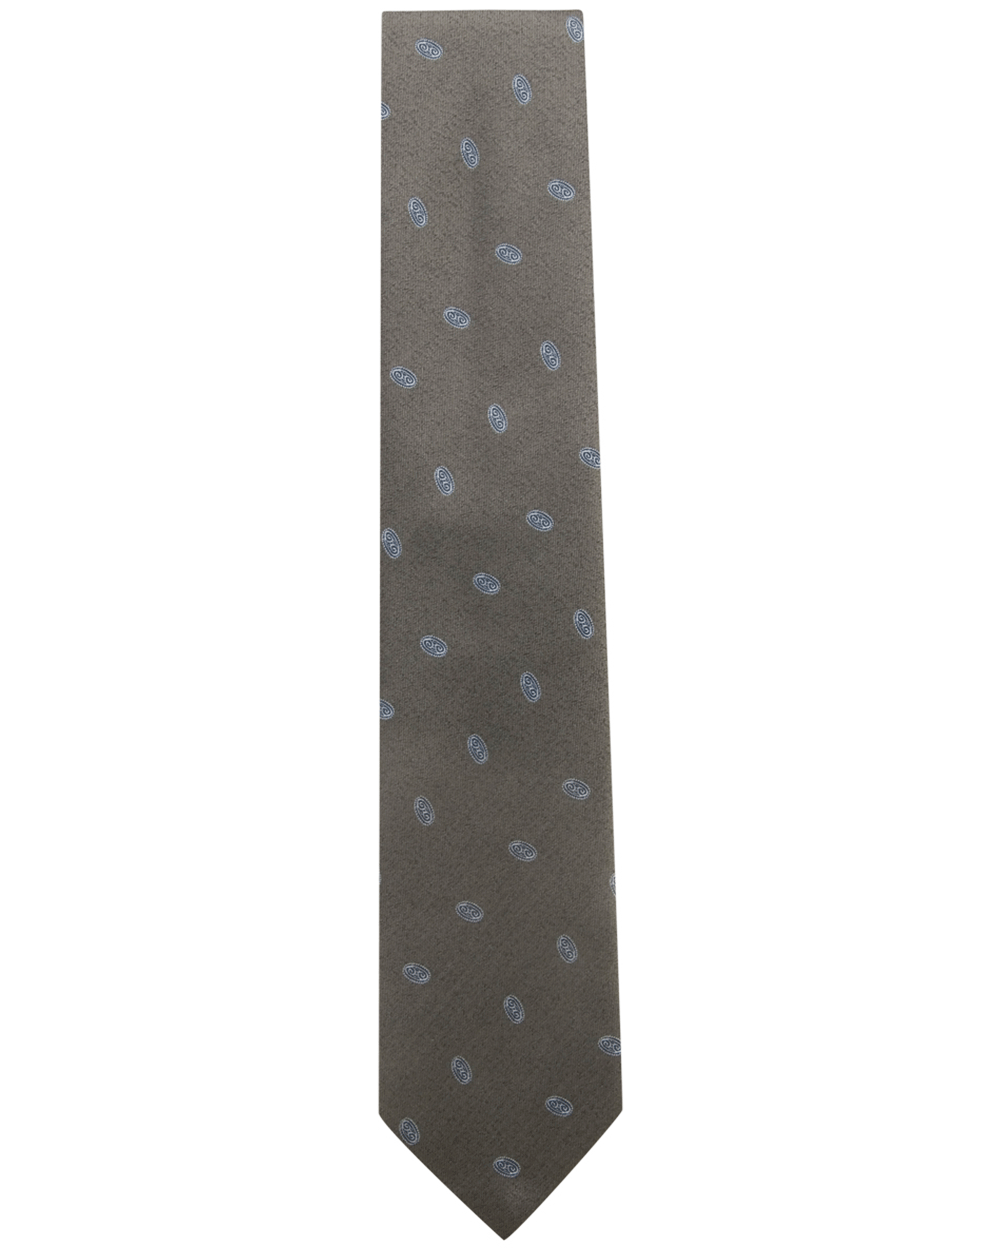 Flannel and Sky Blue Motif Tie